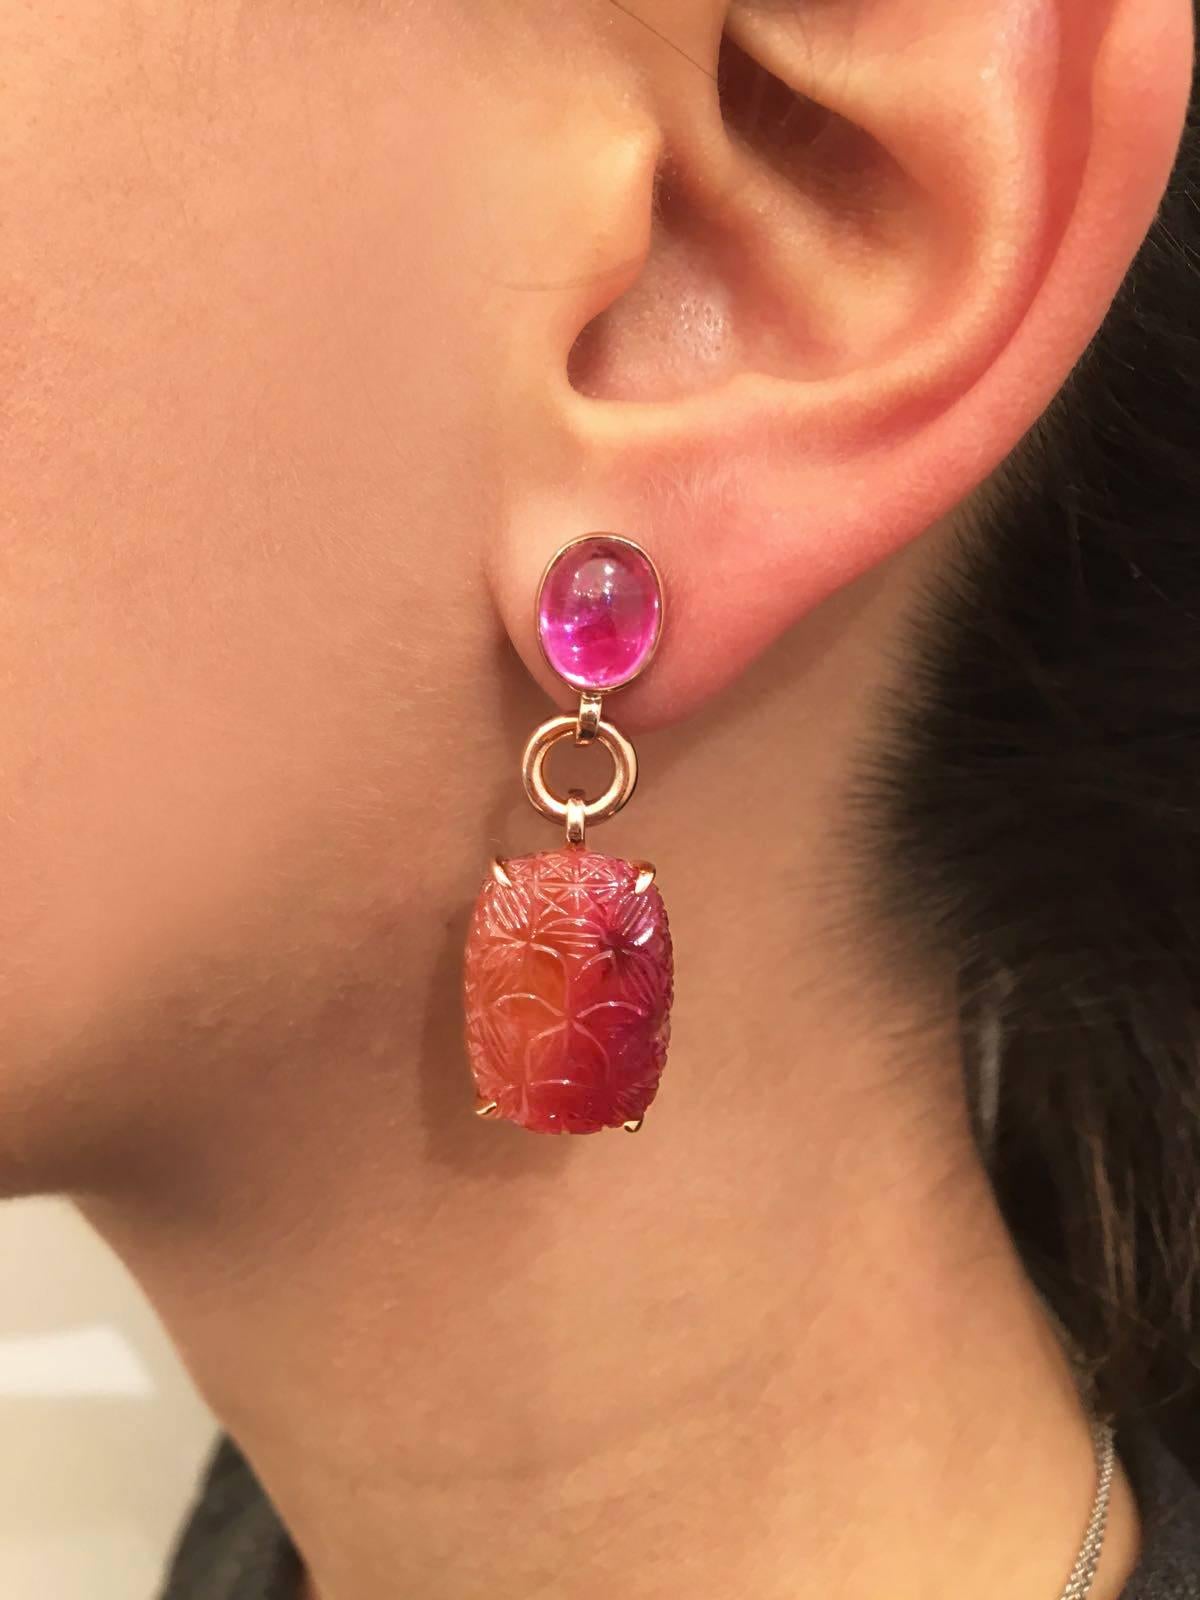 Handmade in Italy.
35.85ct. pair of sculpted two-colour tourmalines with a pair of 7.20ct. paraiban pink cabochon tourmalines.
9k Rose Gold